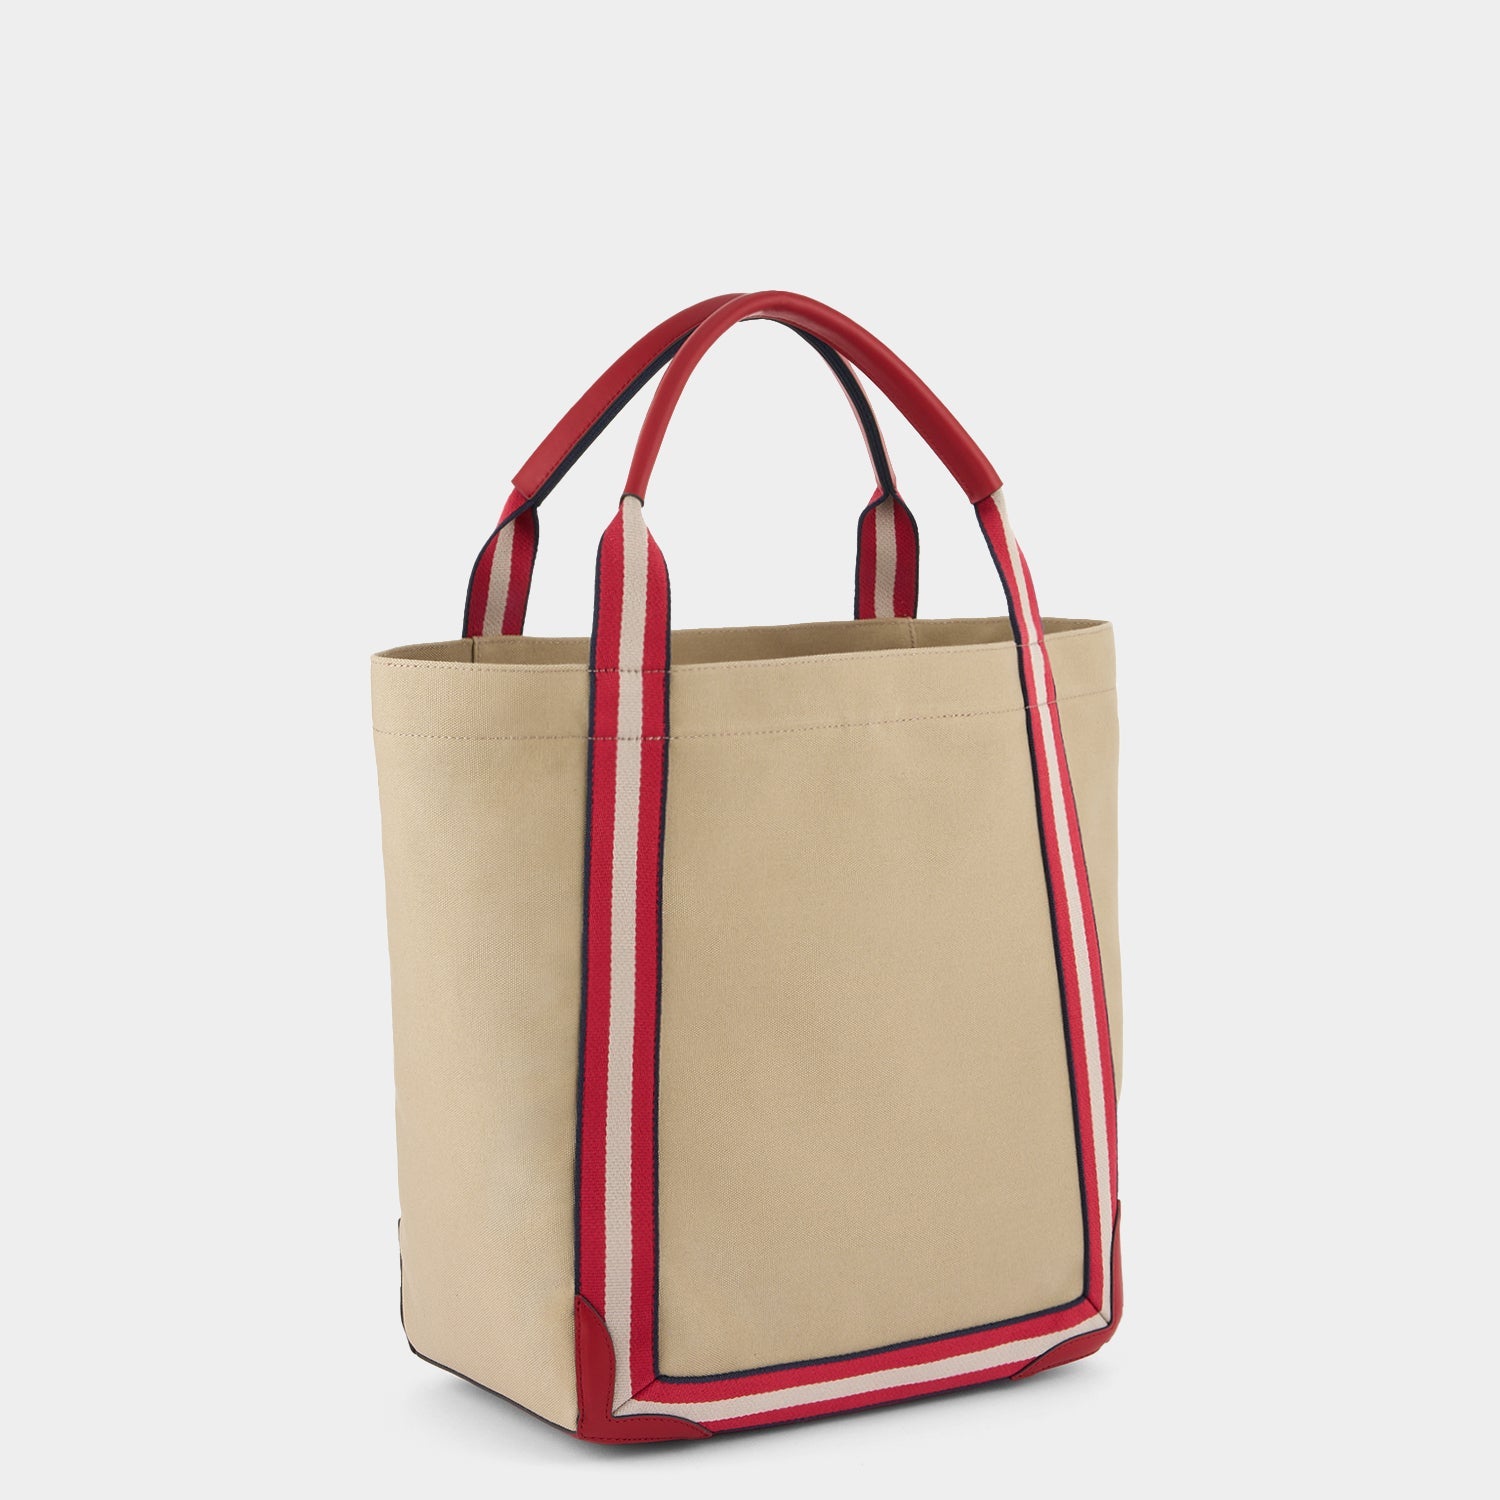 Bespoke Walton Large Tote -

                  
                    Circus Leather in Red -
                  

                  Anya Hindmarch US
